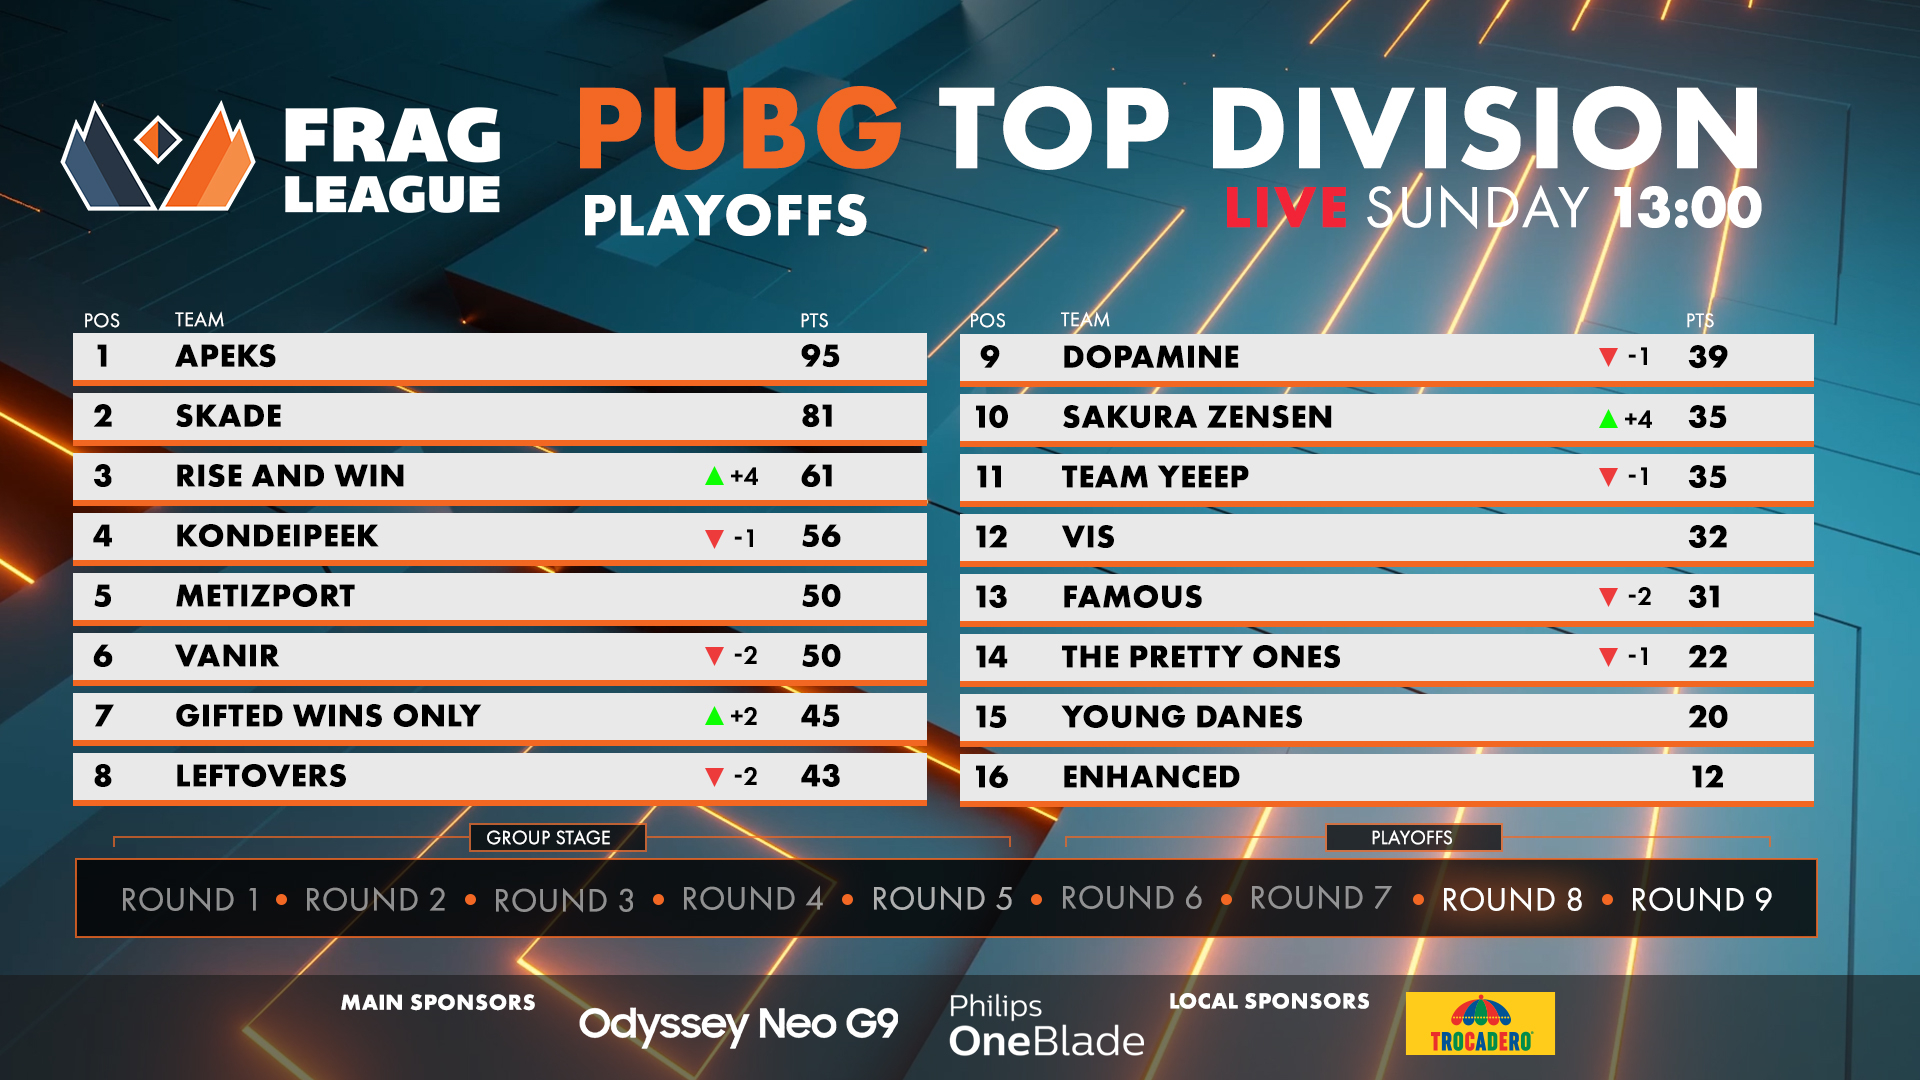 Top Division Standings as we head into Round 8 of the Playoffs